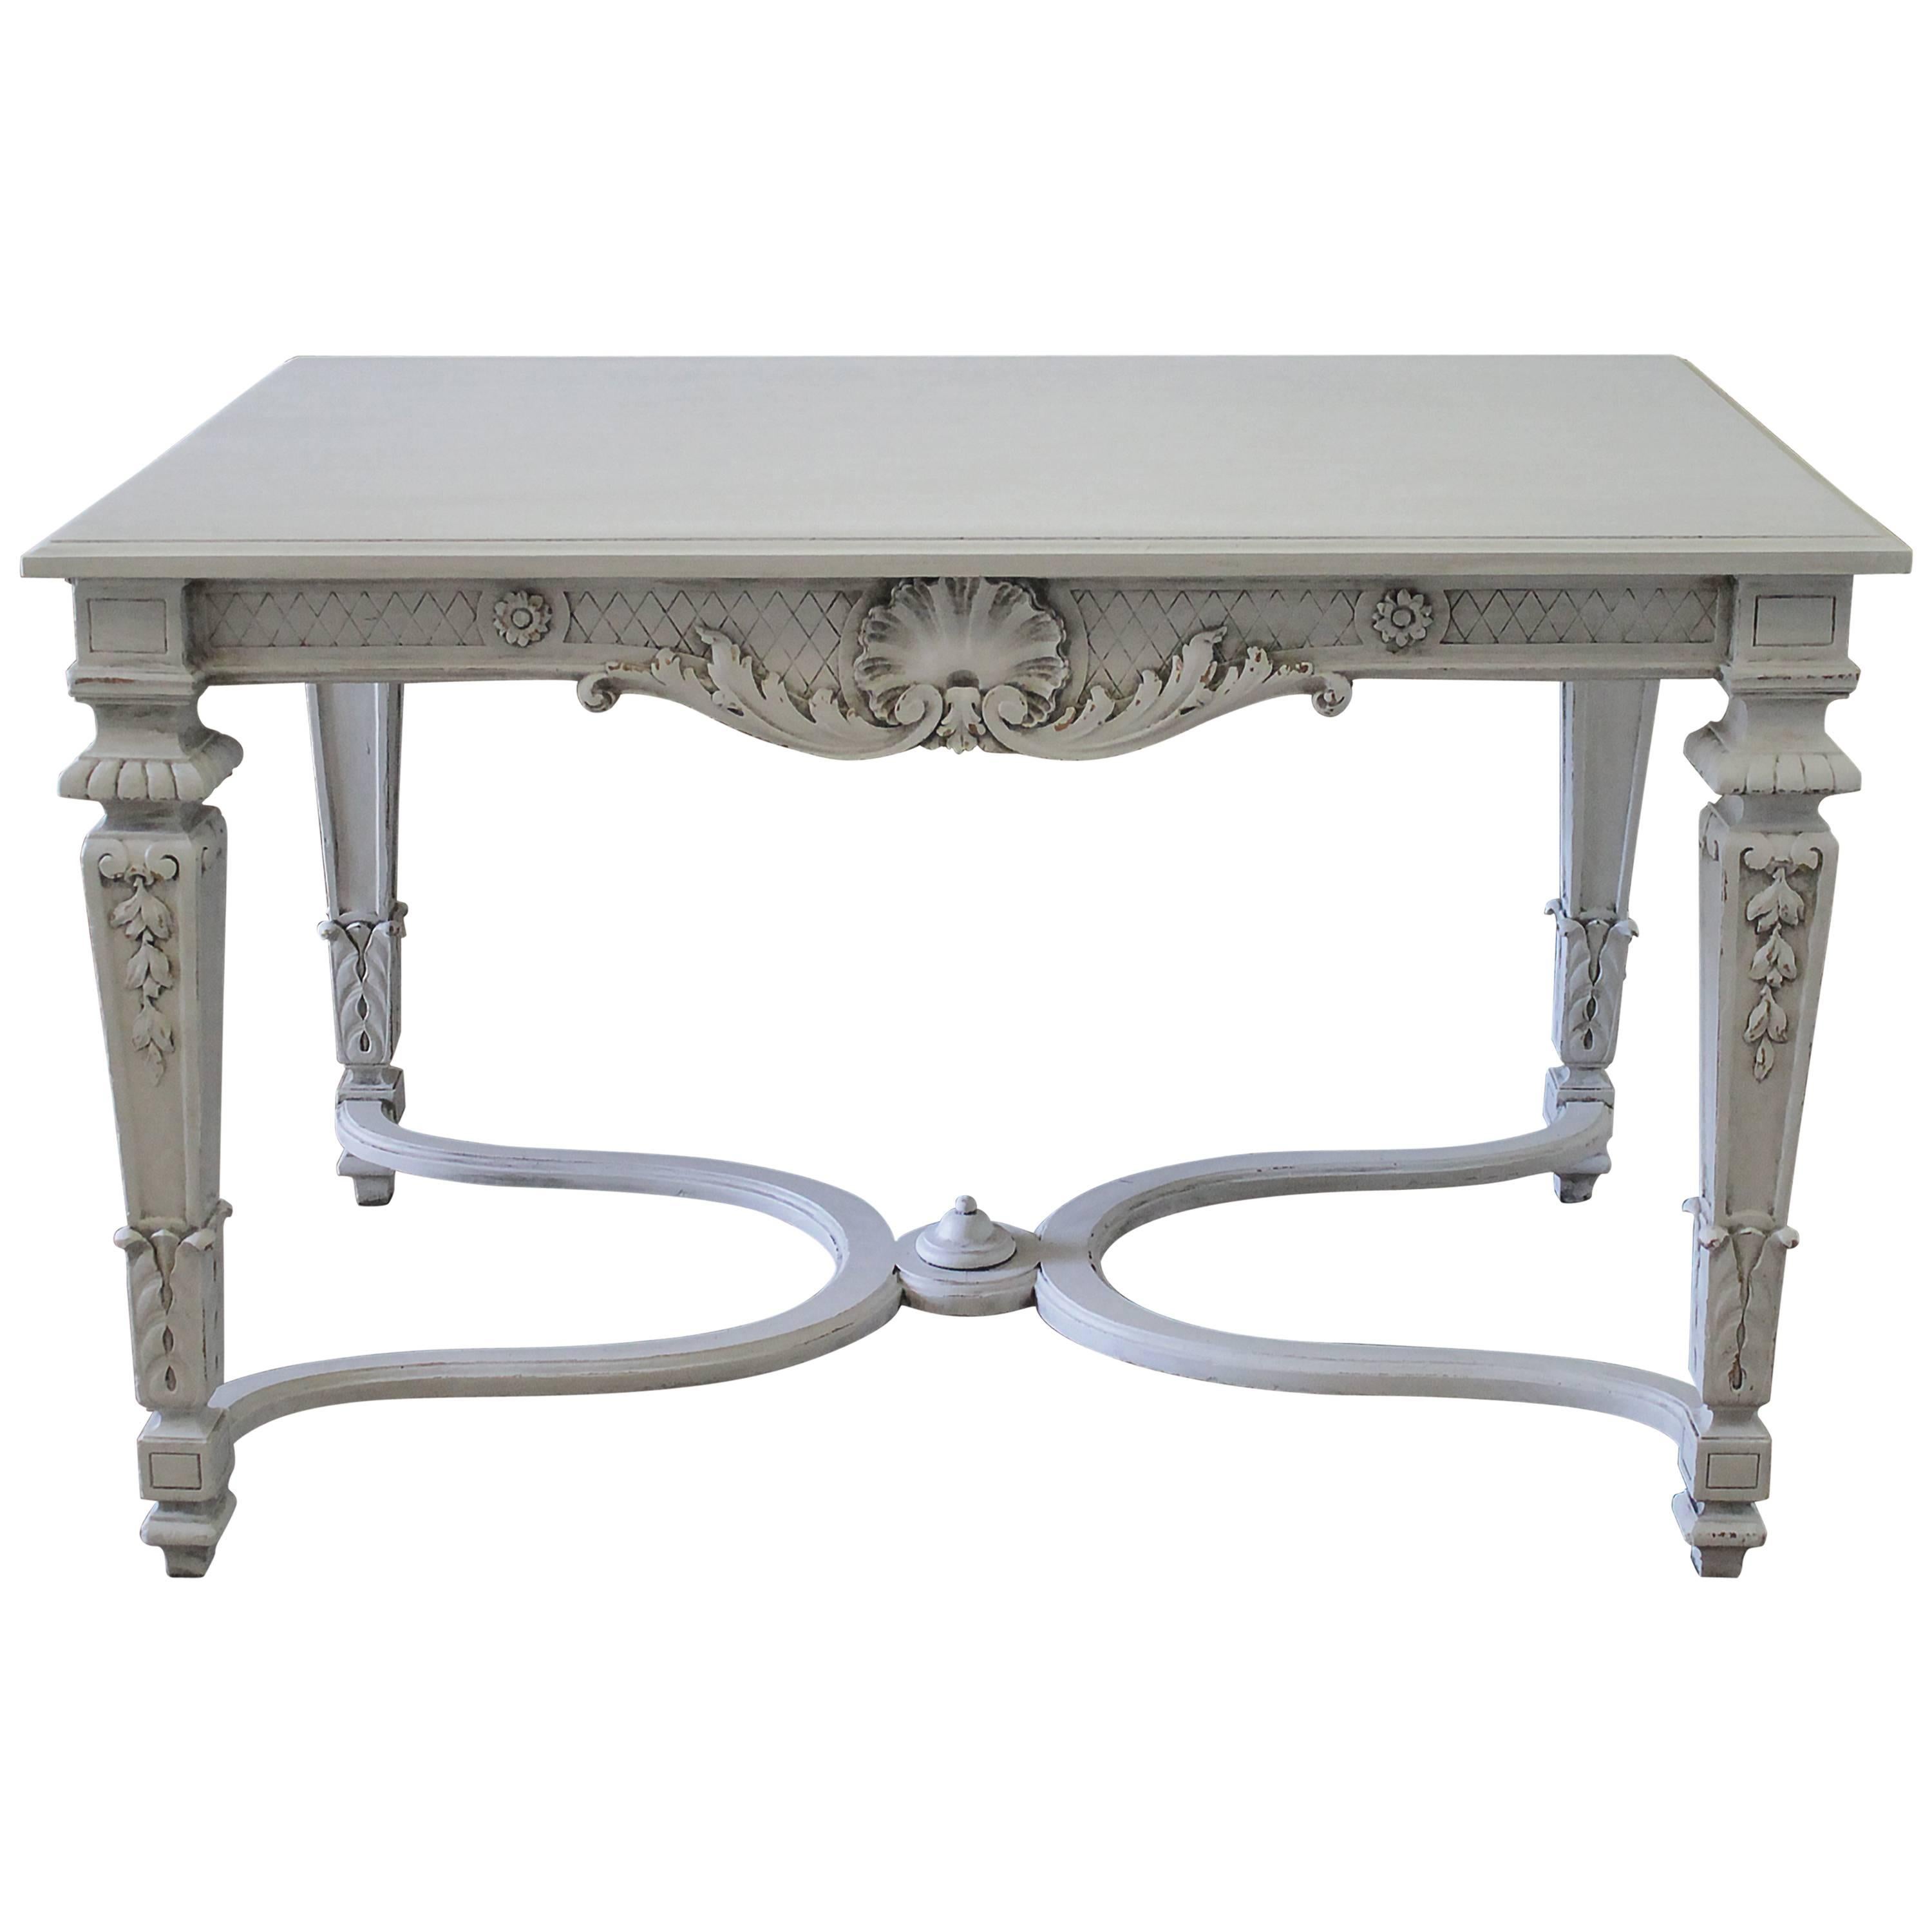 20th Century Carved and Painted Neoclassical Style Centre Table